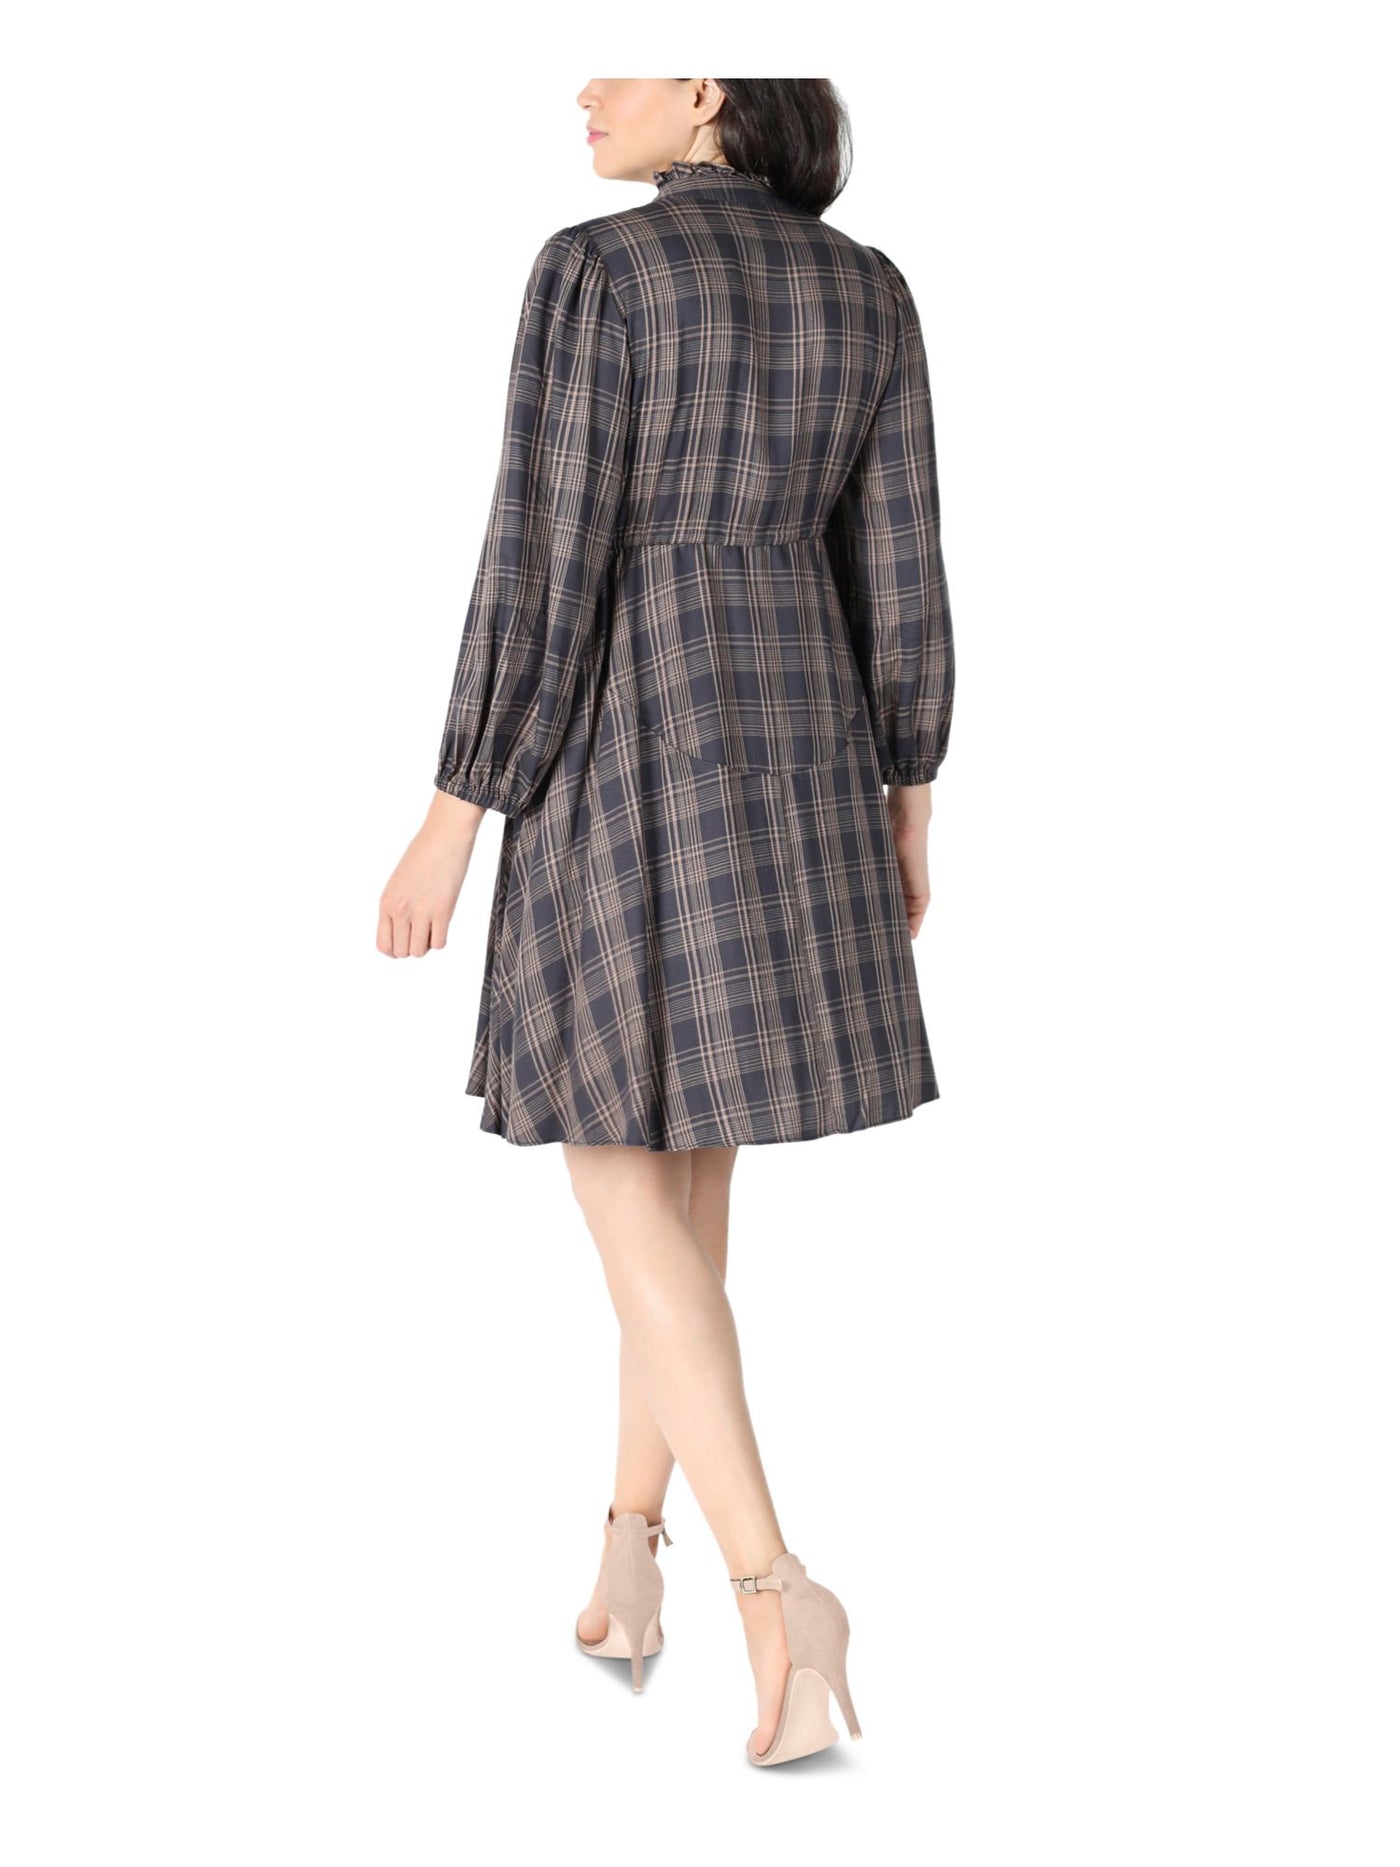 SIGNATURE BY ROBBIE BEE Womens Gray Ruffled Drawstring Waist Unlined Plaid Balloon Sleeve Split Above The Knee Fit + Flare Dress Petites 10P